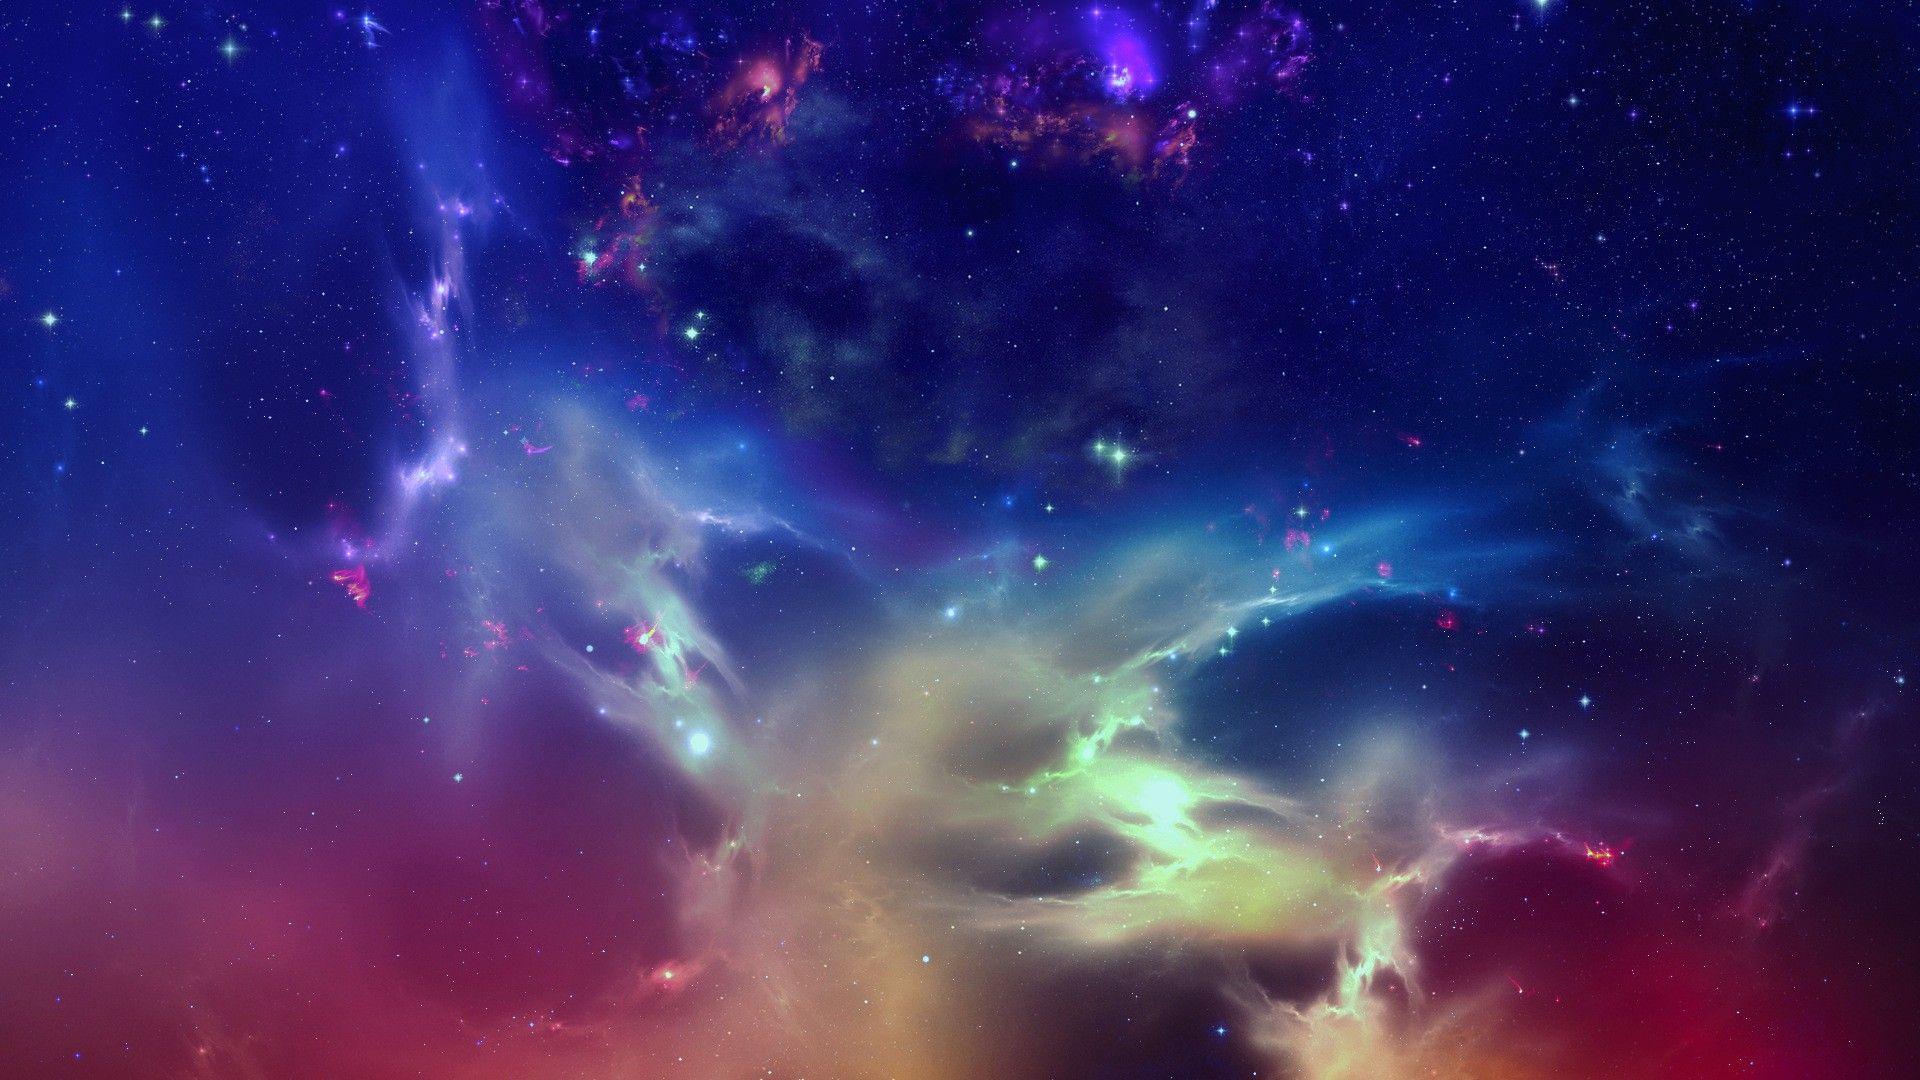 1080p Space wallpaperDownload free High Resolution background